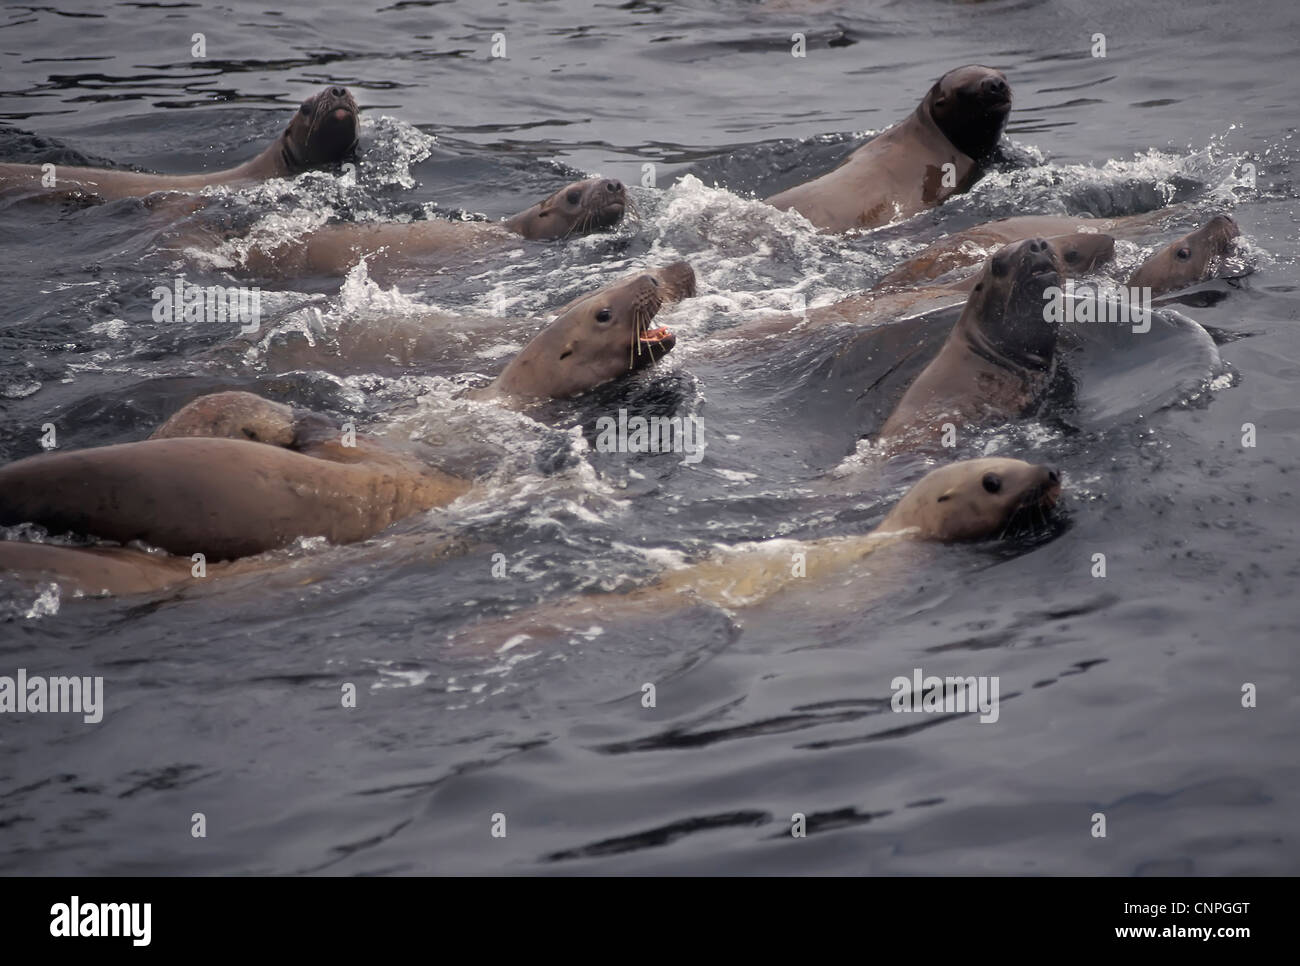 Steller's Sea Lions take to the water to feed near the Inian Islands, Southeast Alaska. Stock Photo